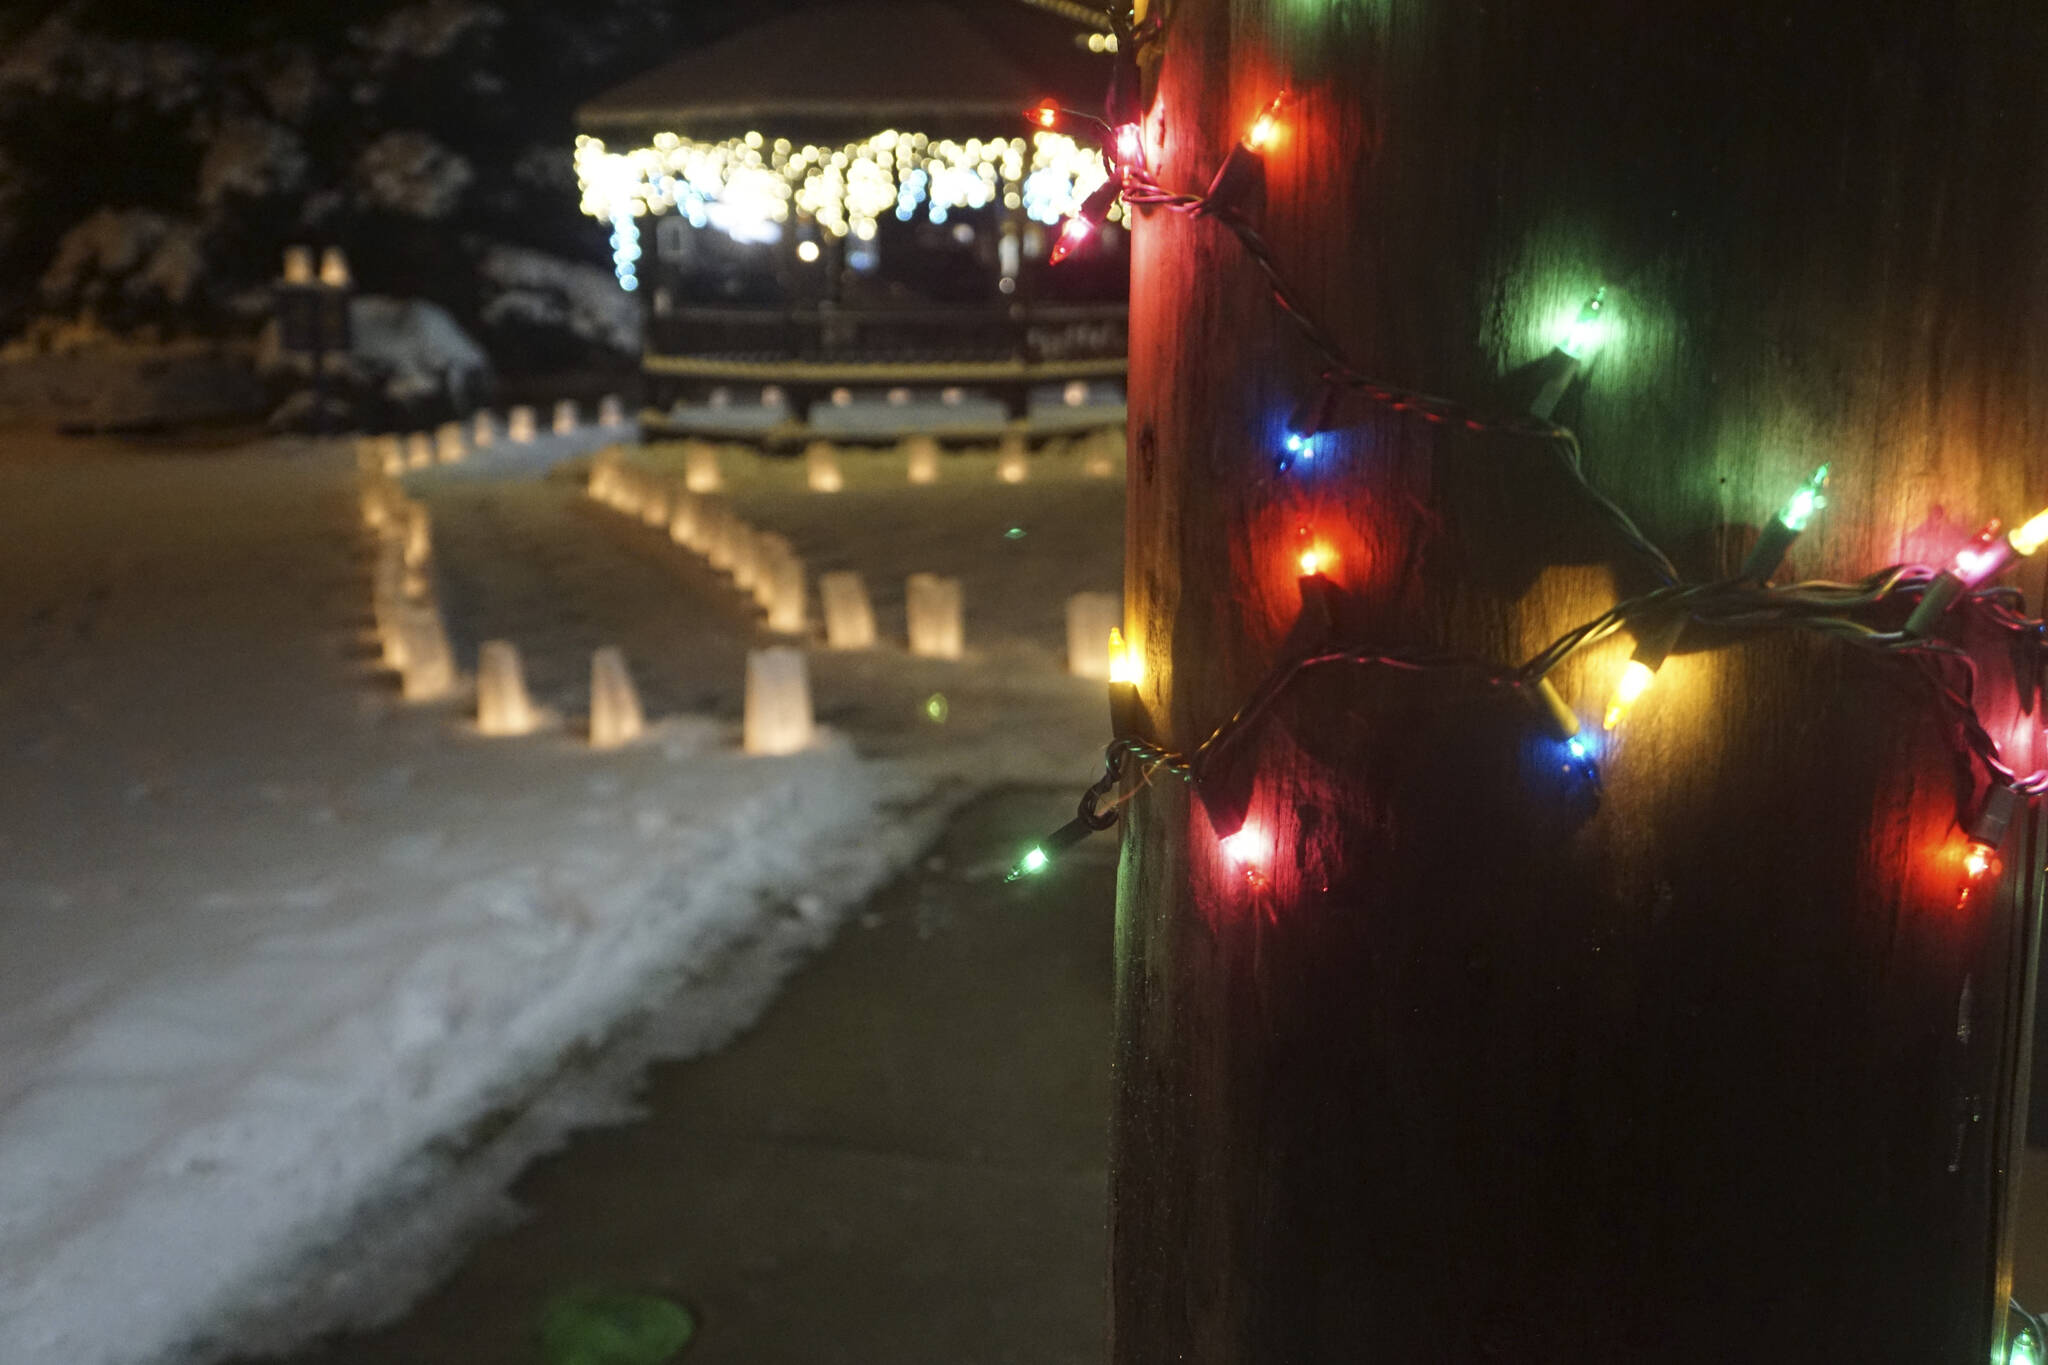 Rows of luminarias line the path at Light Up a Life, a fundraiser for Hospice of Homer, on Thursday, Dec. 15, 2022, at WKFL Park in Homer, Alaska. (Photo by Michael Armstrong/Homer News)